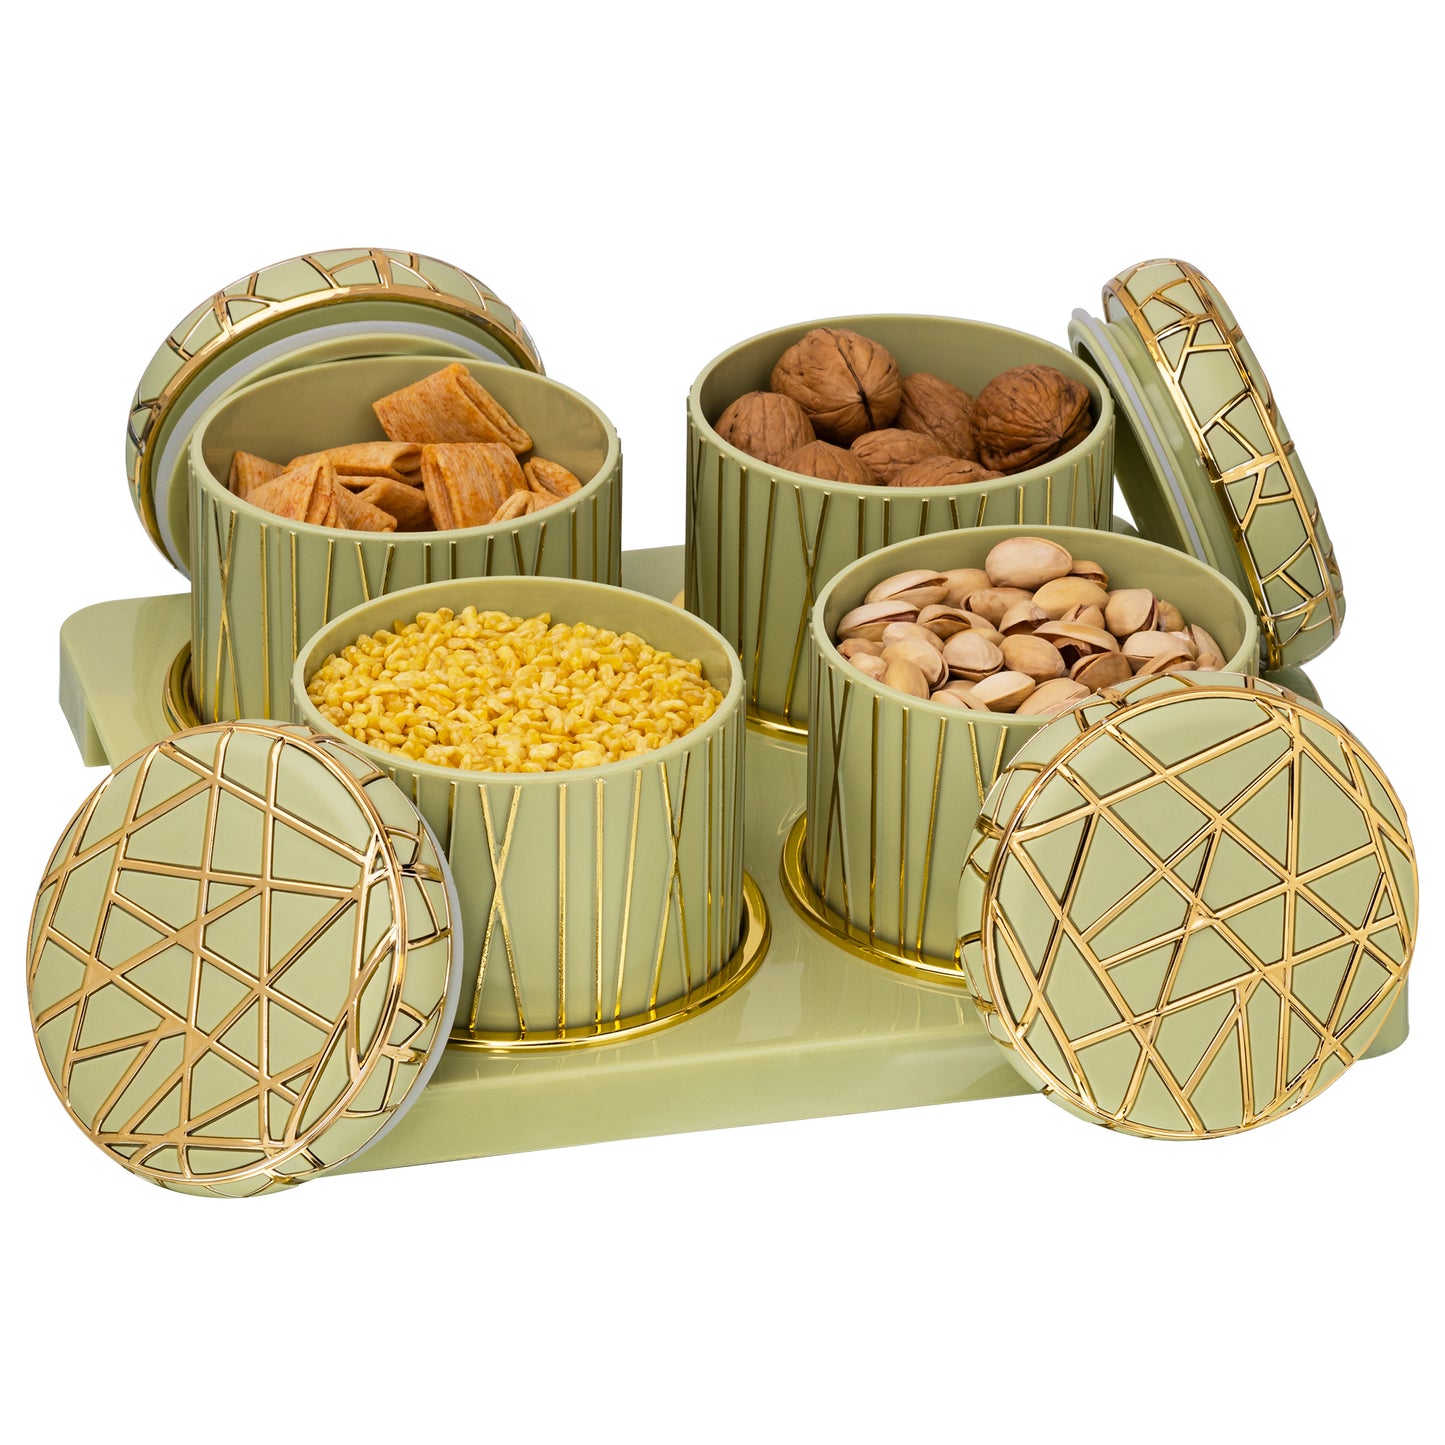 SELVEL Royal Linex Airtight Dry Fruit Container Tray Set - 4 Pieces (450ml), Lime Green Polypropylene with Luxurious Gold Foil Embellishments